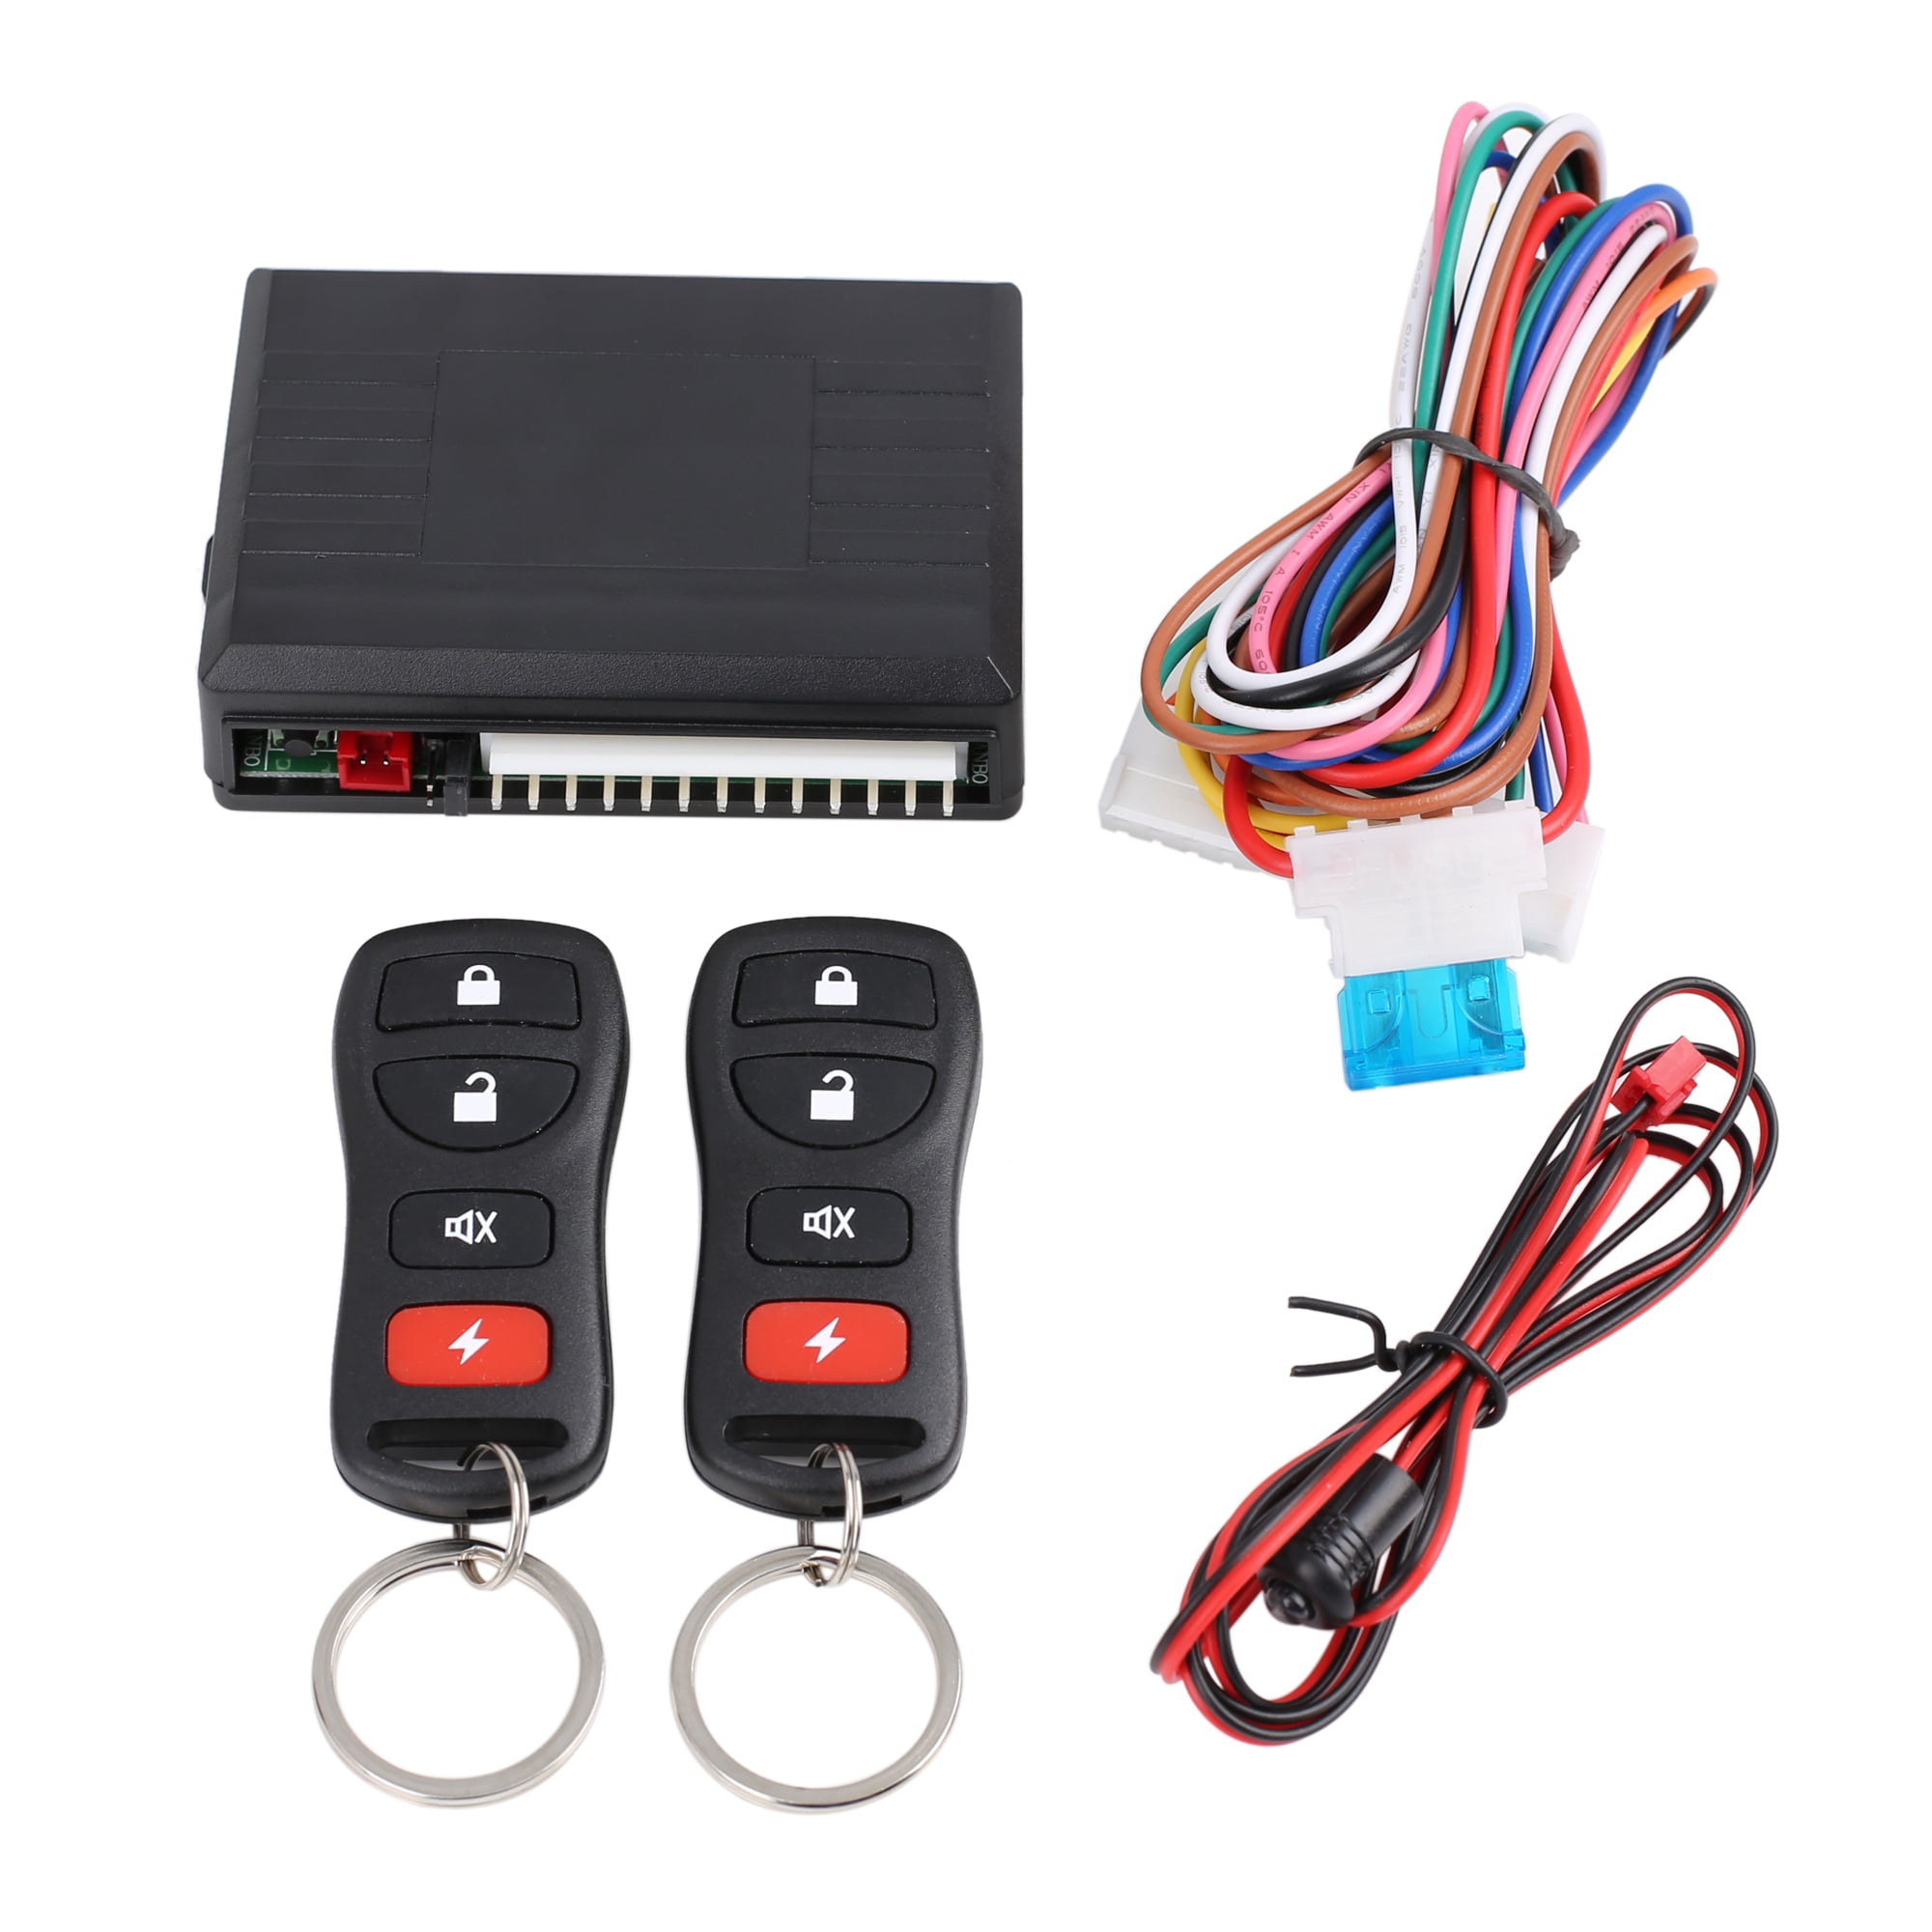 KKmoon 12V Universal Car Auto Remote Central Locking Control Kit Door Lock Locking Vehicle Keyless Entry System with 2 Remote Control 